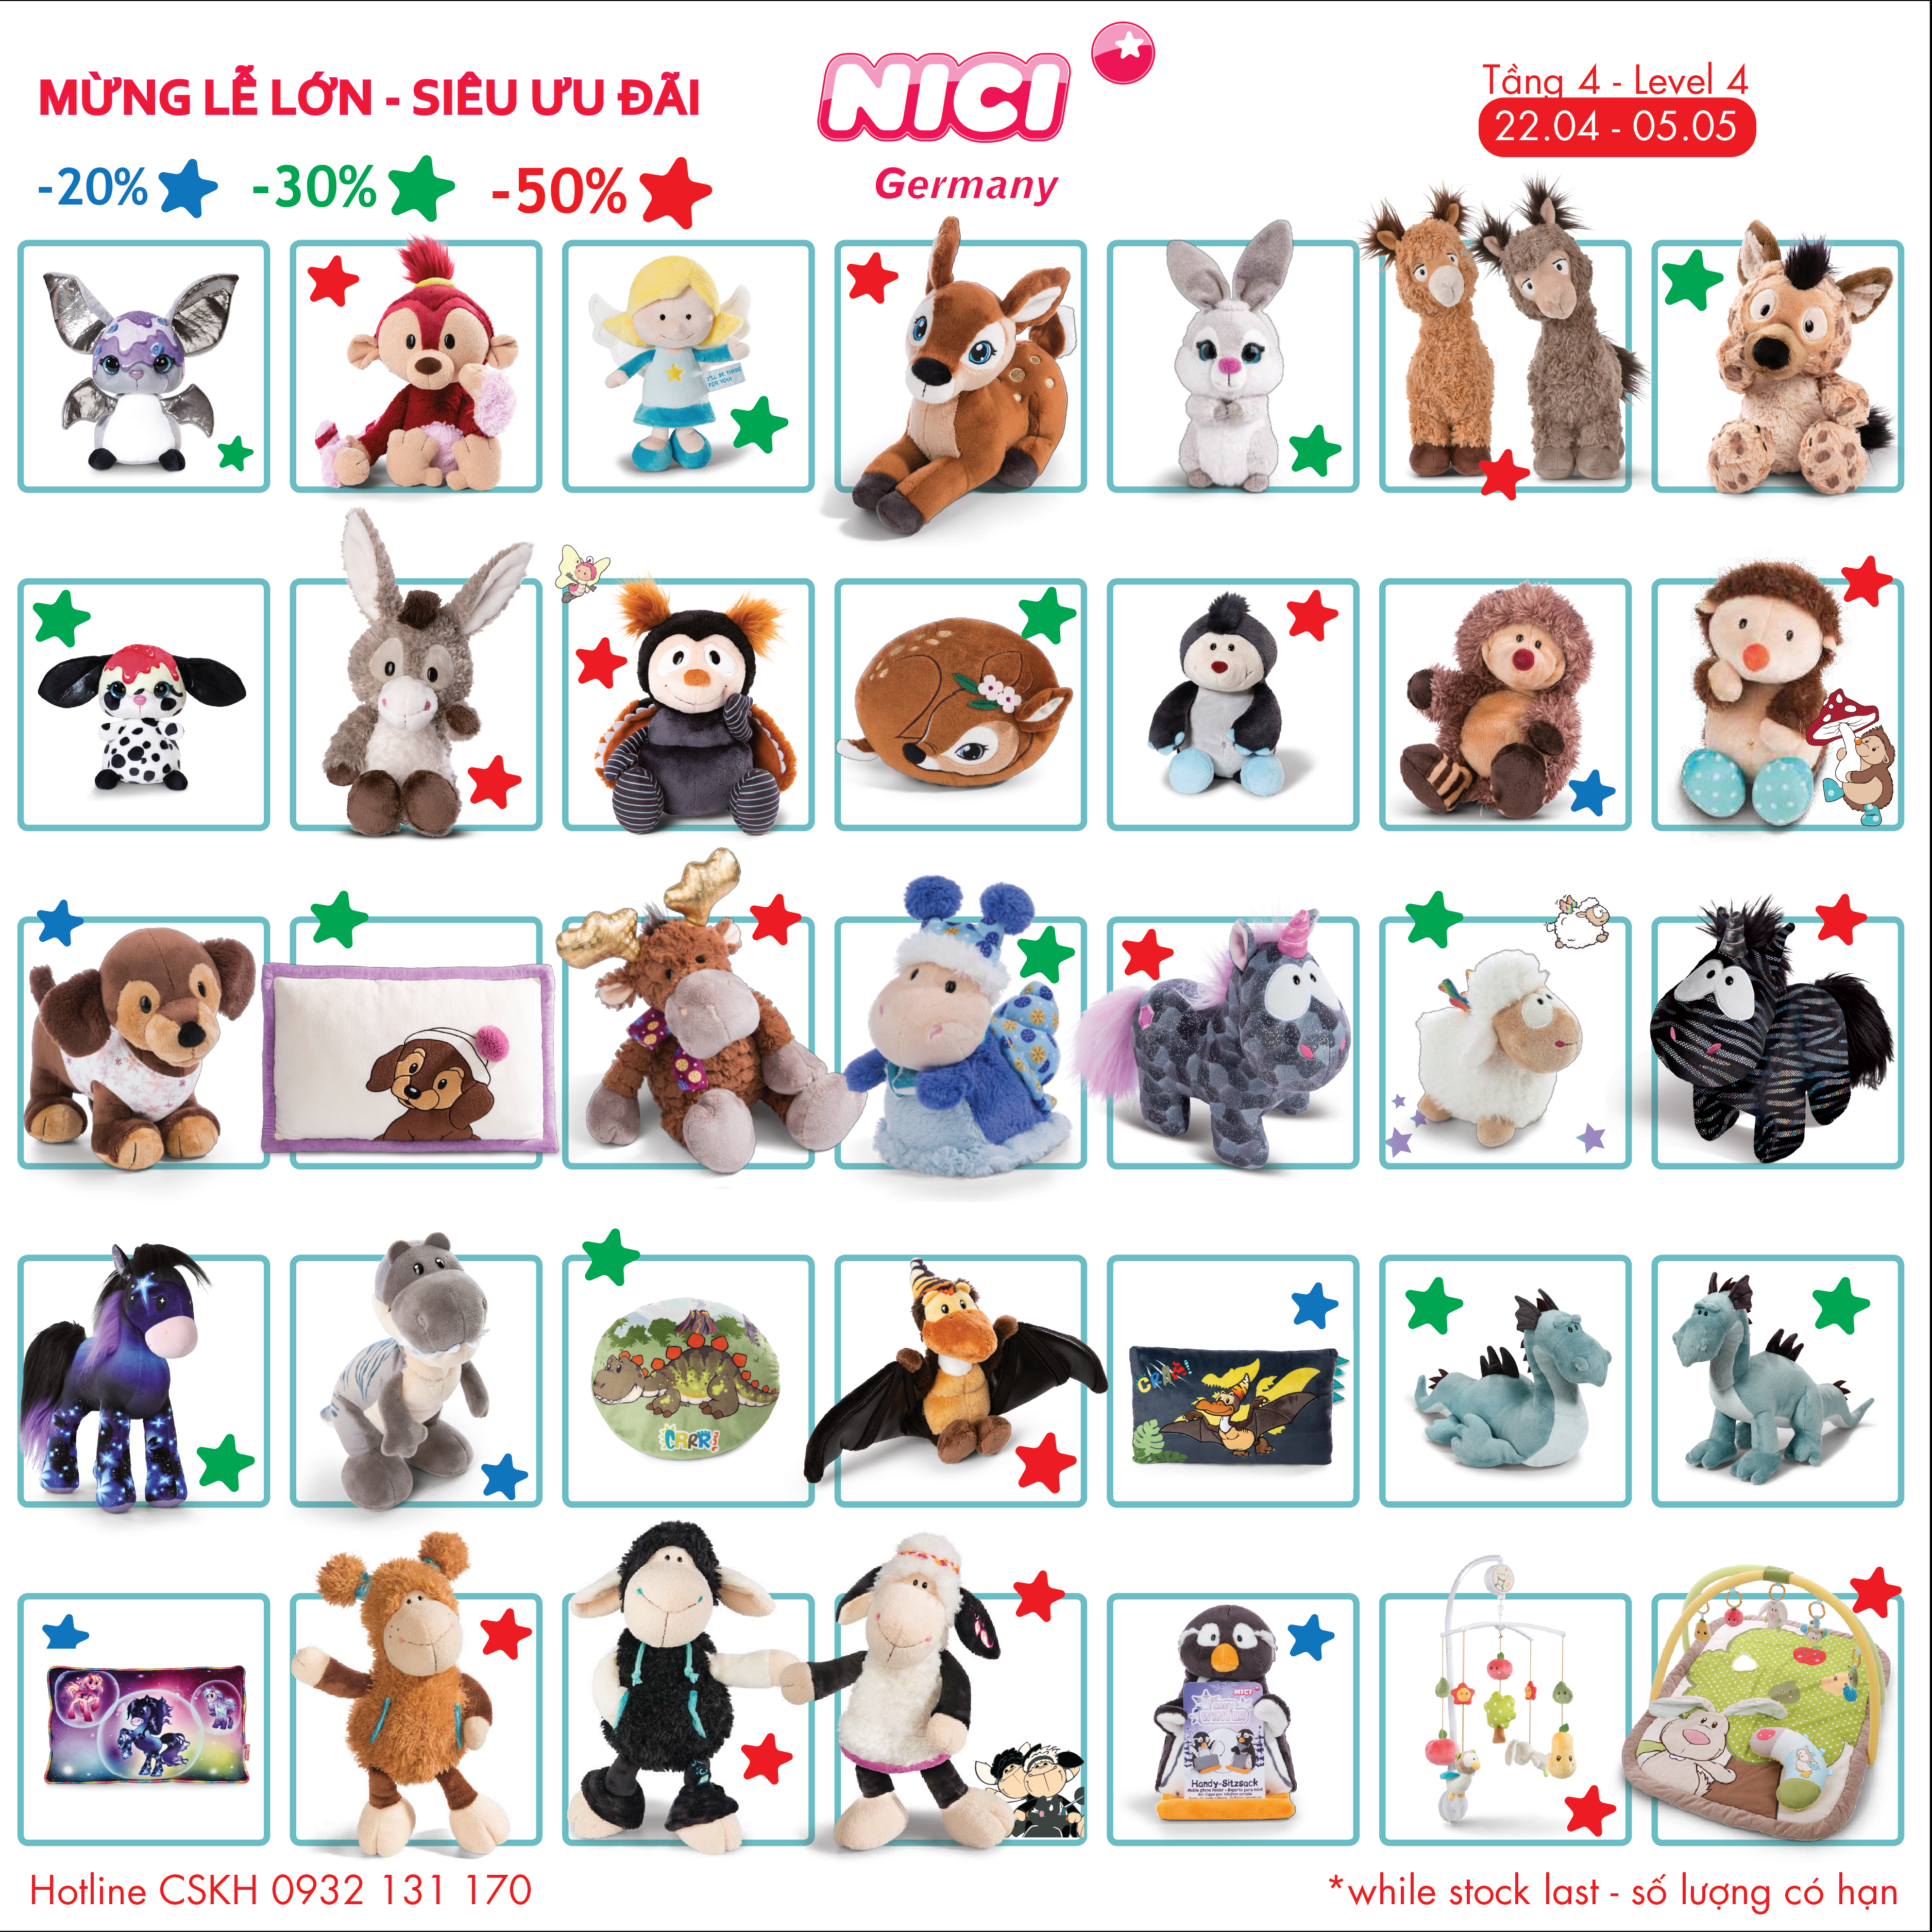 Celebrating "30/04 & 01/05" with NICI GERMANY the high-end soft toys brand made by German designers with limited edition at Estella Place